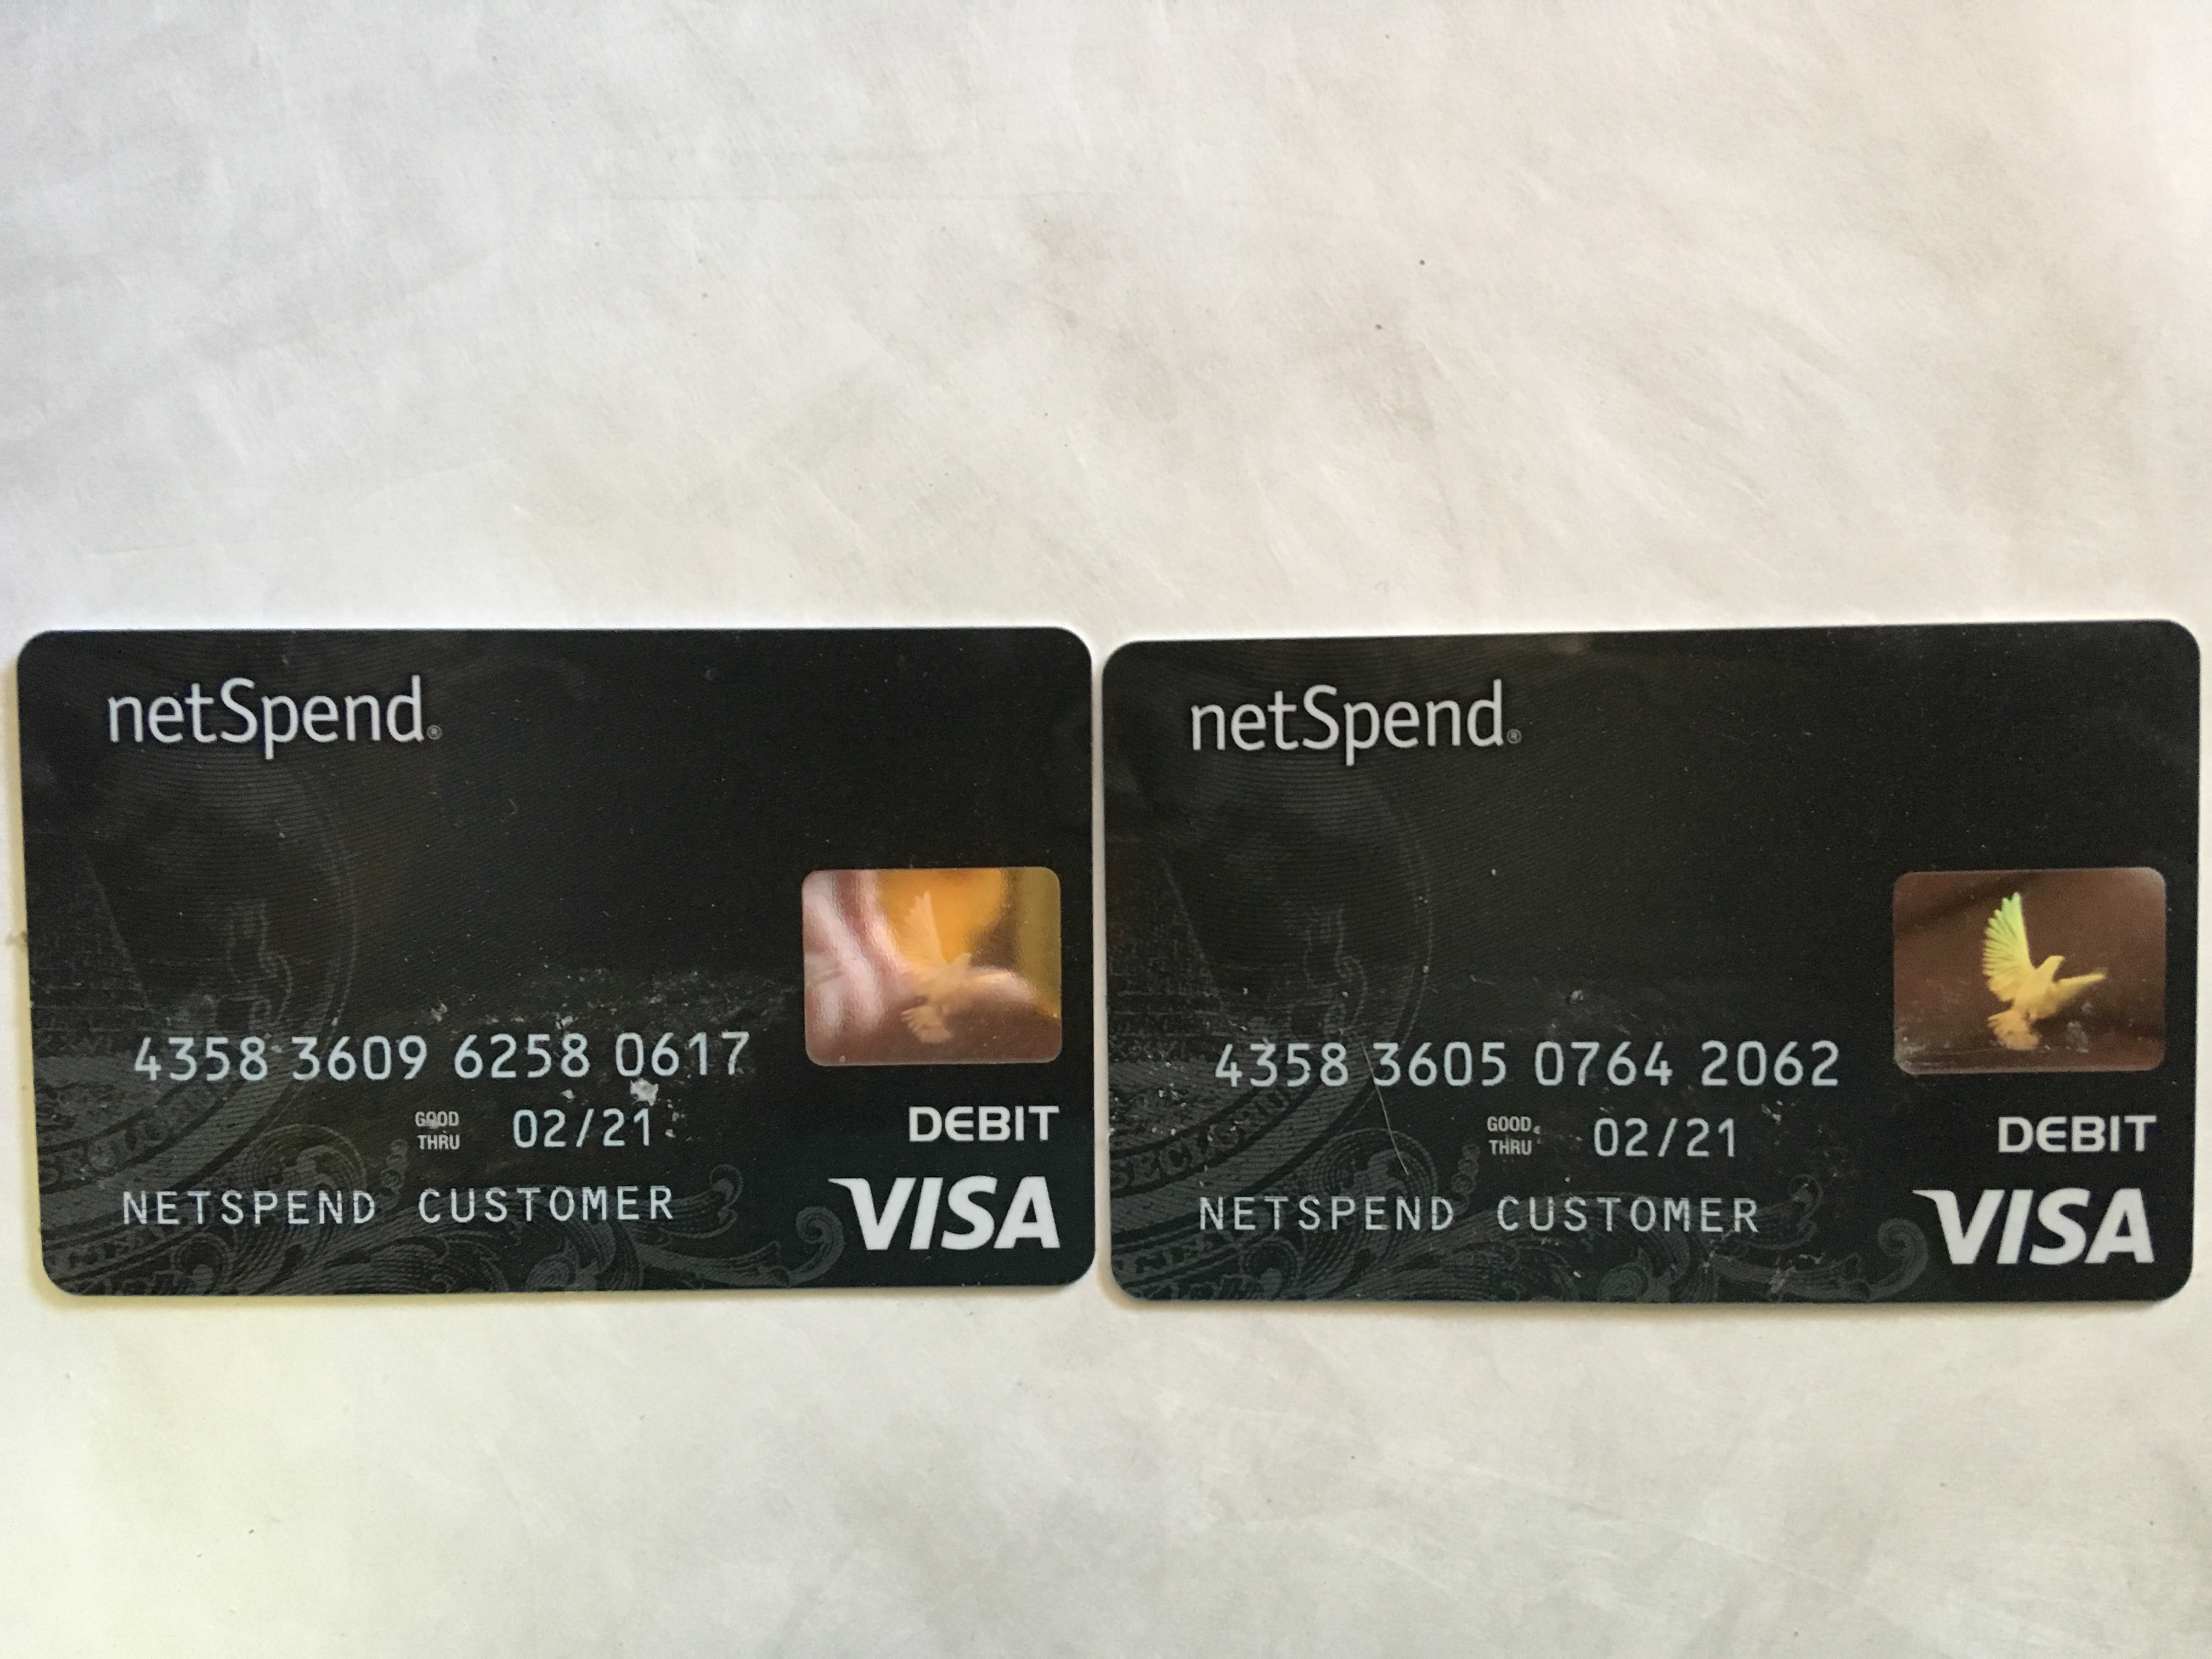 @ Prepaid debt cards purchased